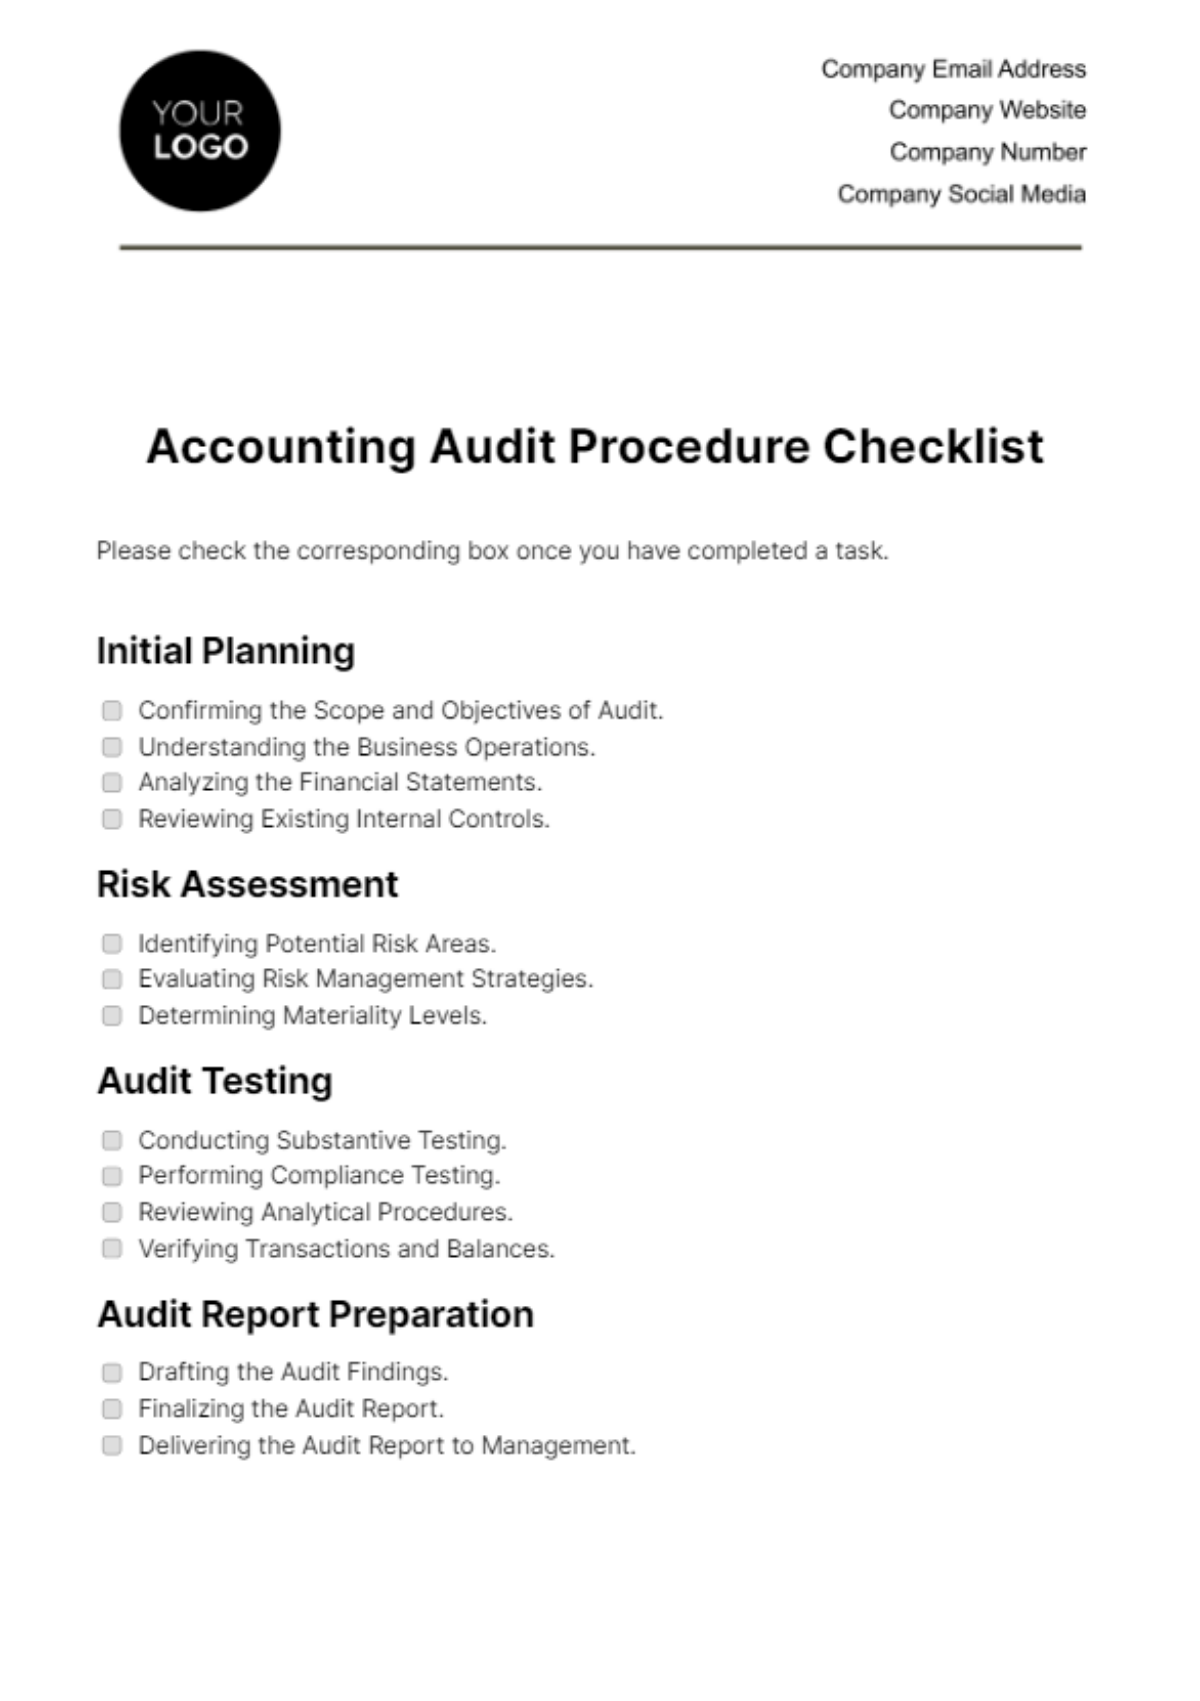 Accounting Audit Procedure Checklist Template